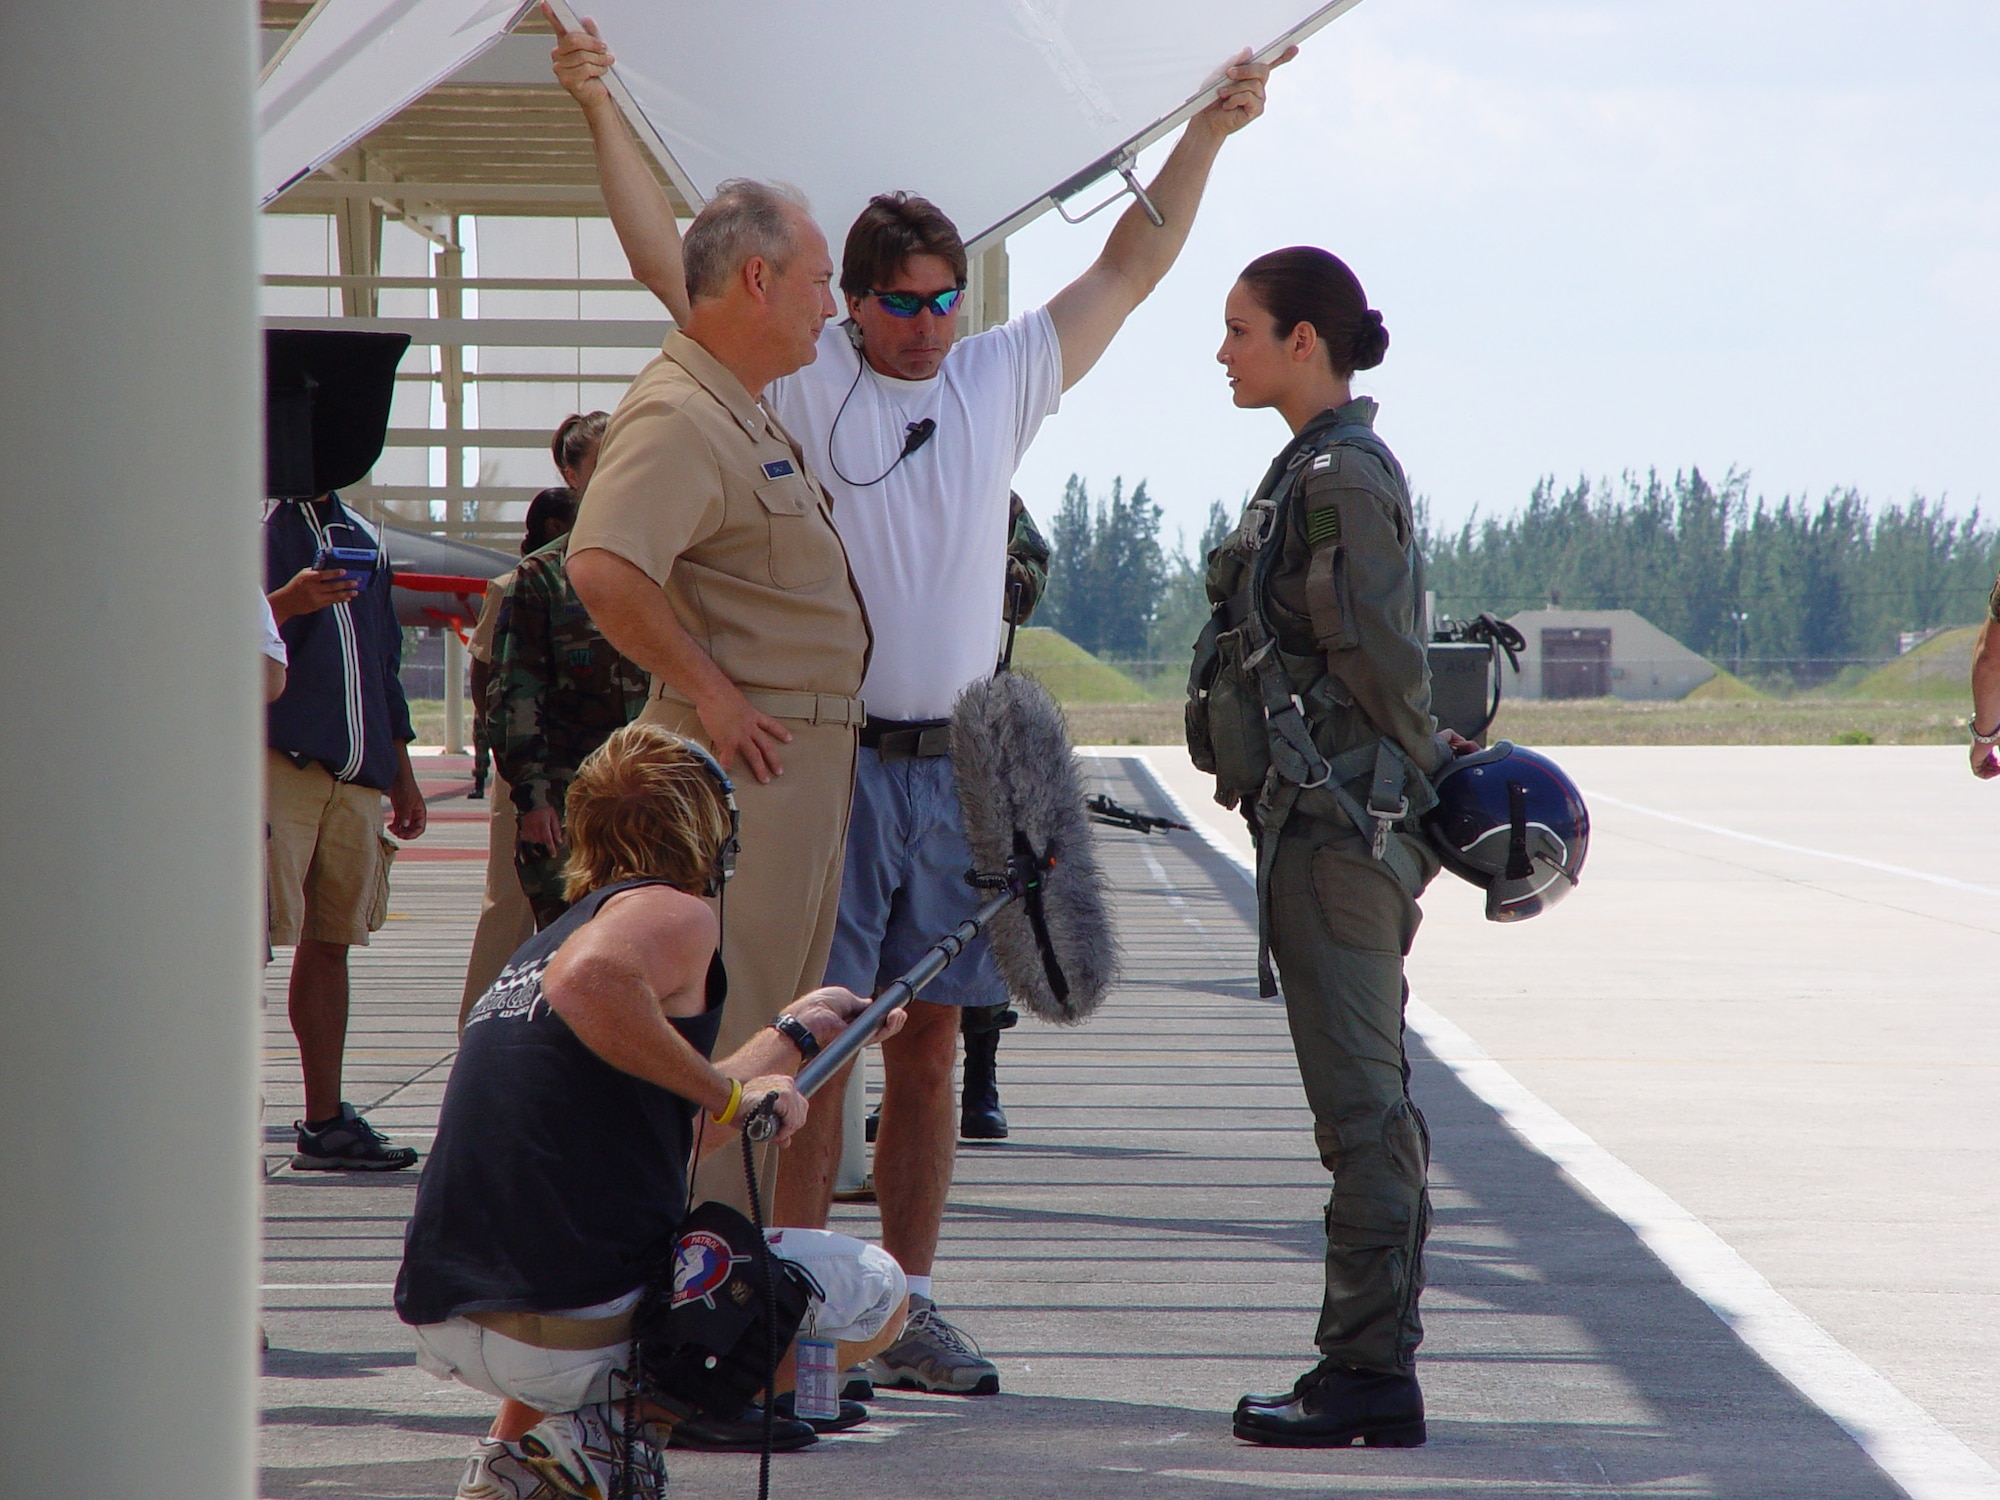 Miss Universe 2001 Denise Quinones, right, cuts a scene on the aircraft ramp here at Homestead Air Reserve Base, Fla. on March 27. She plays the role of Rachel Starling, an F-18 pilot and potential love interest of "Aquaman." The Warner Brothers crew shot scenes at five locations on the reserve base. (US Air Force Reserve Photo by Lisa M. Macias)